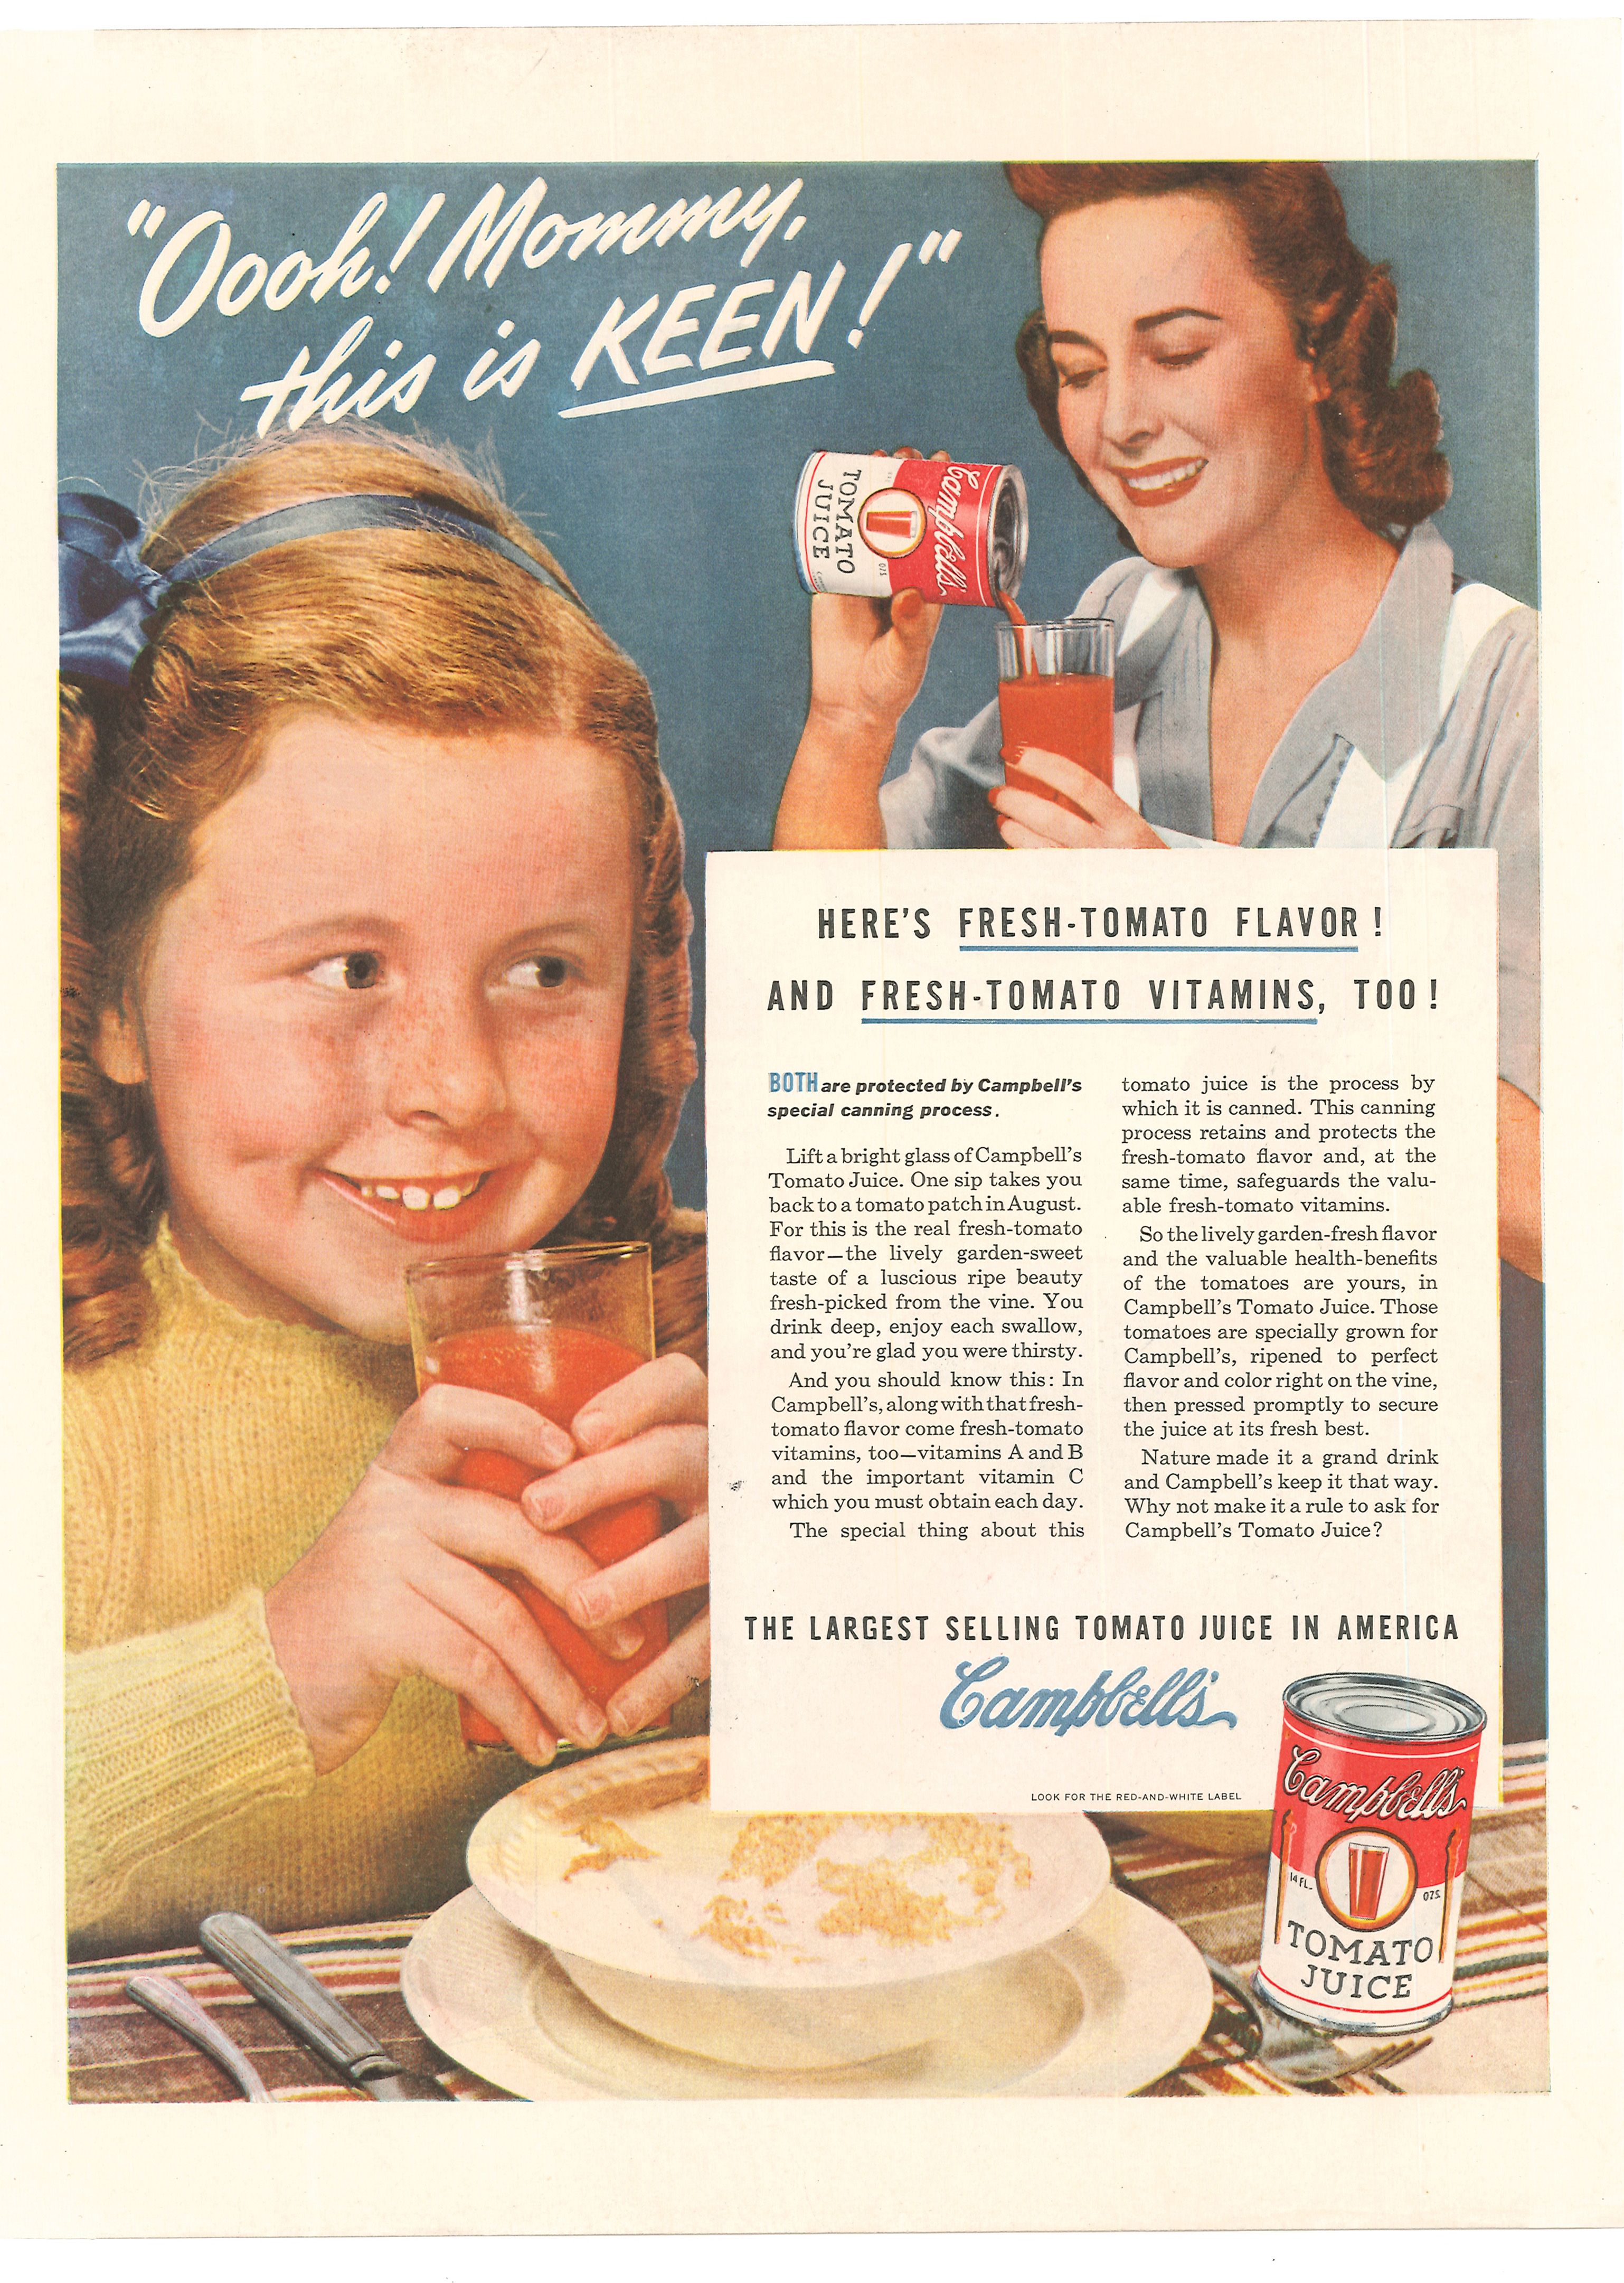 `Oooh! Mommy, this is keen! The largest selling tomatoe juice in America. Campbells.